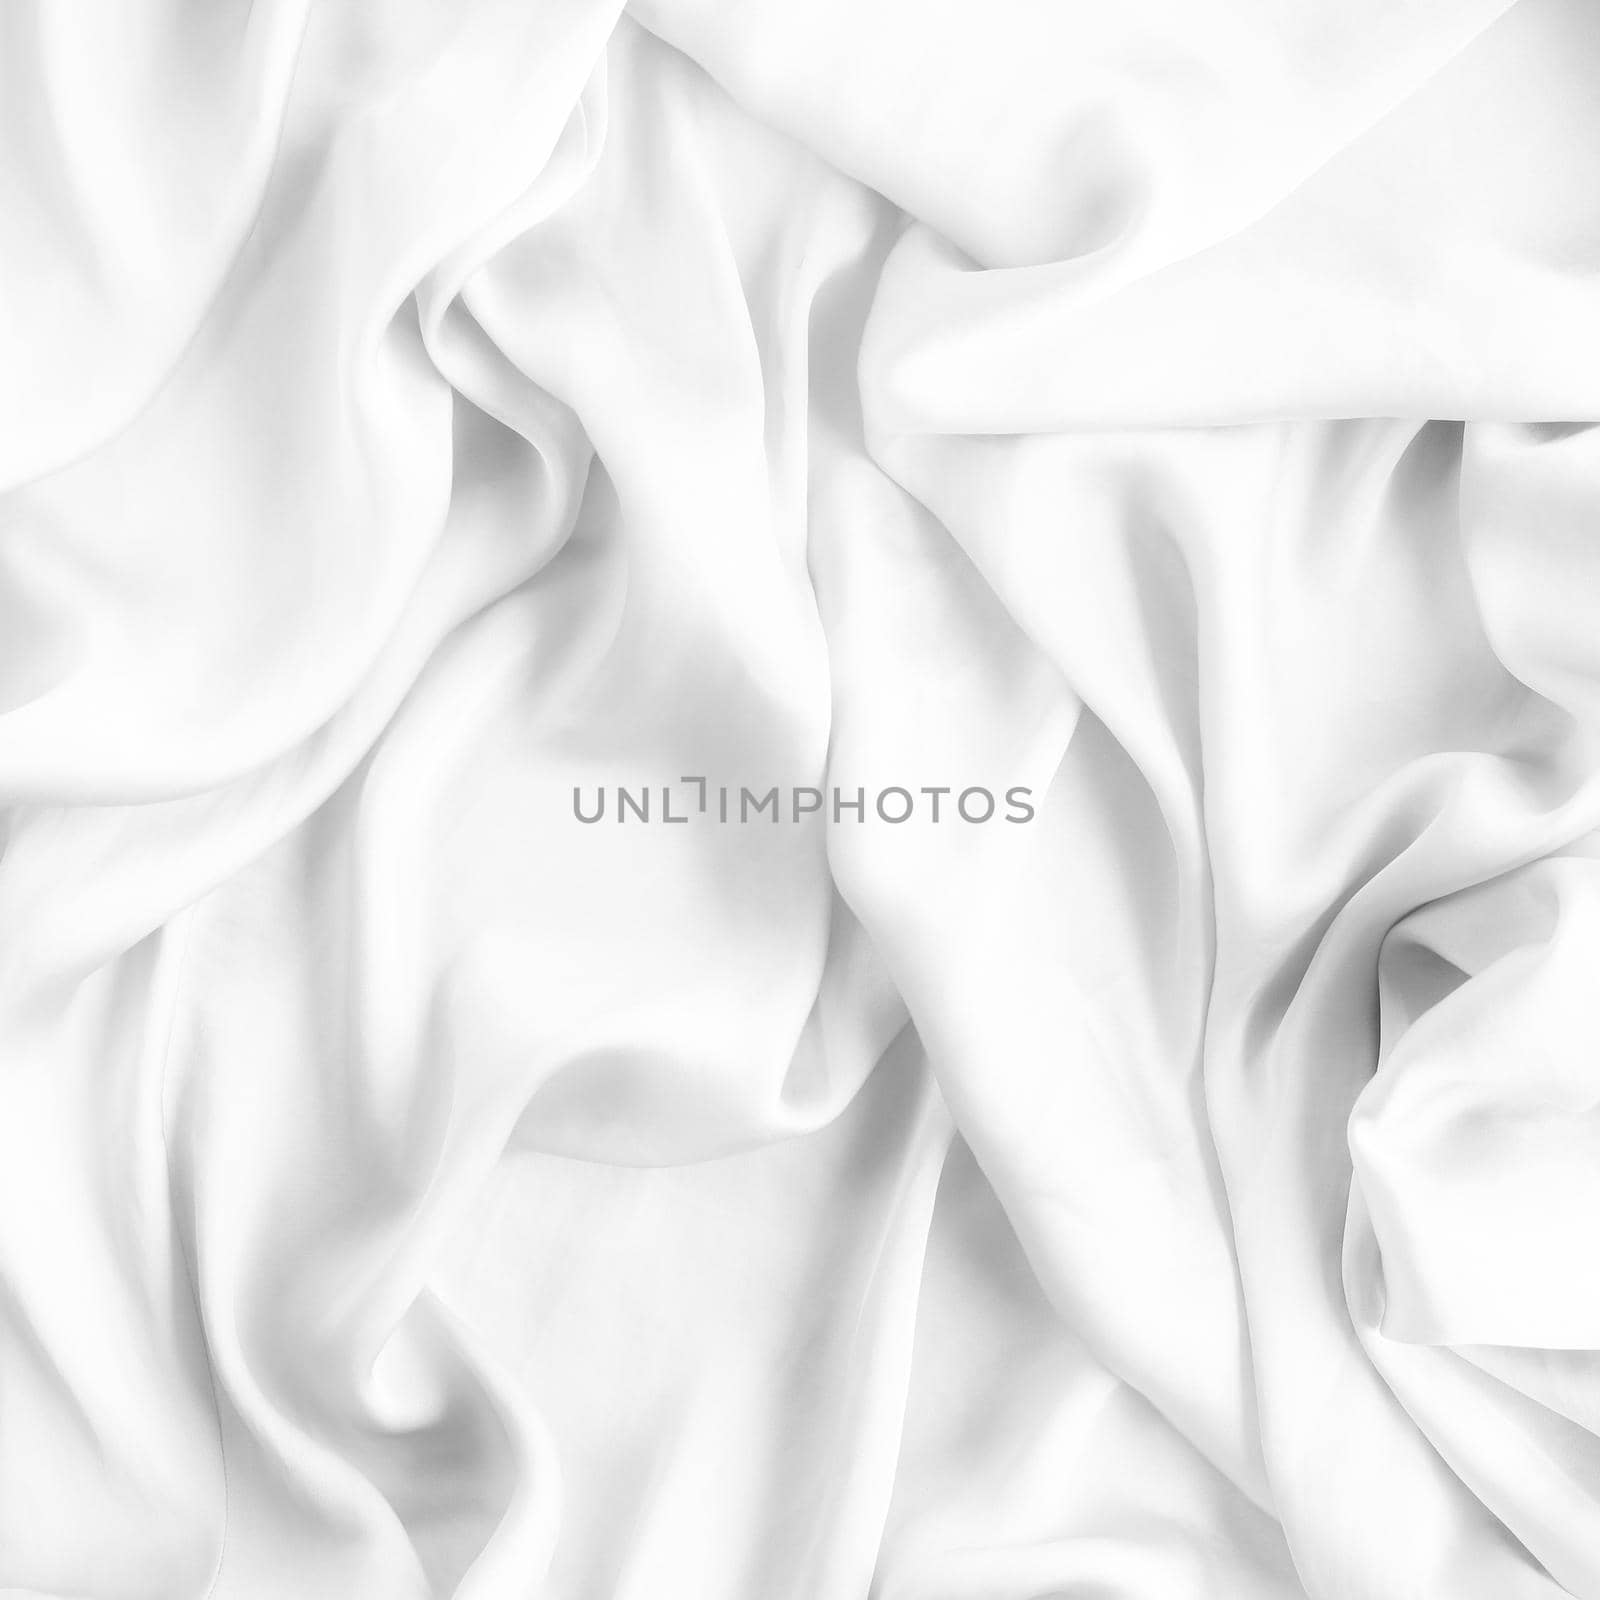 Luxury white soft silk flatlay background texture, holiday beauty abstract backdrop by Anneleven